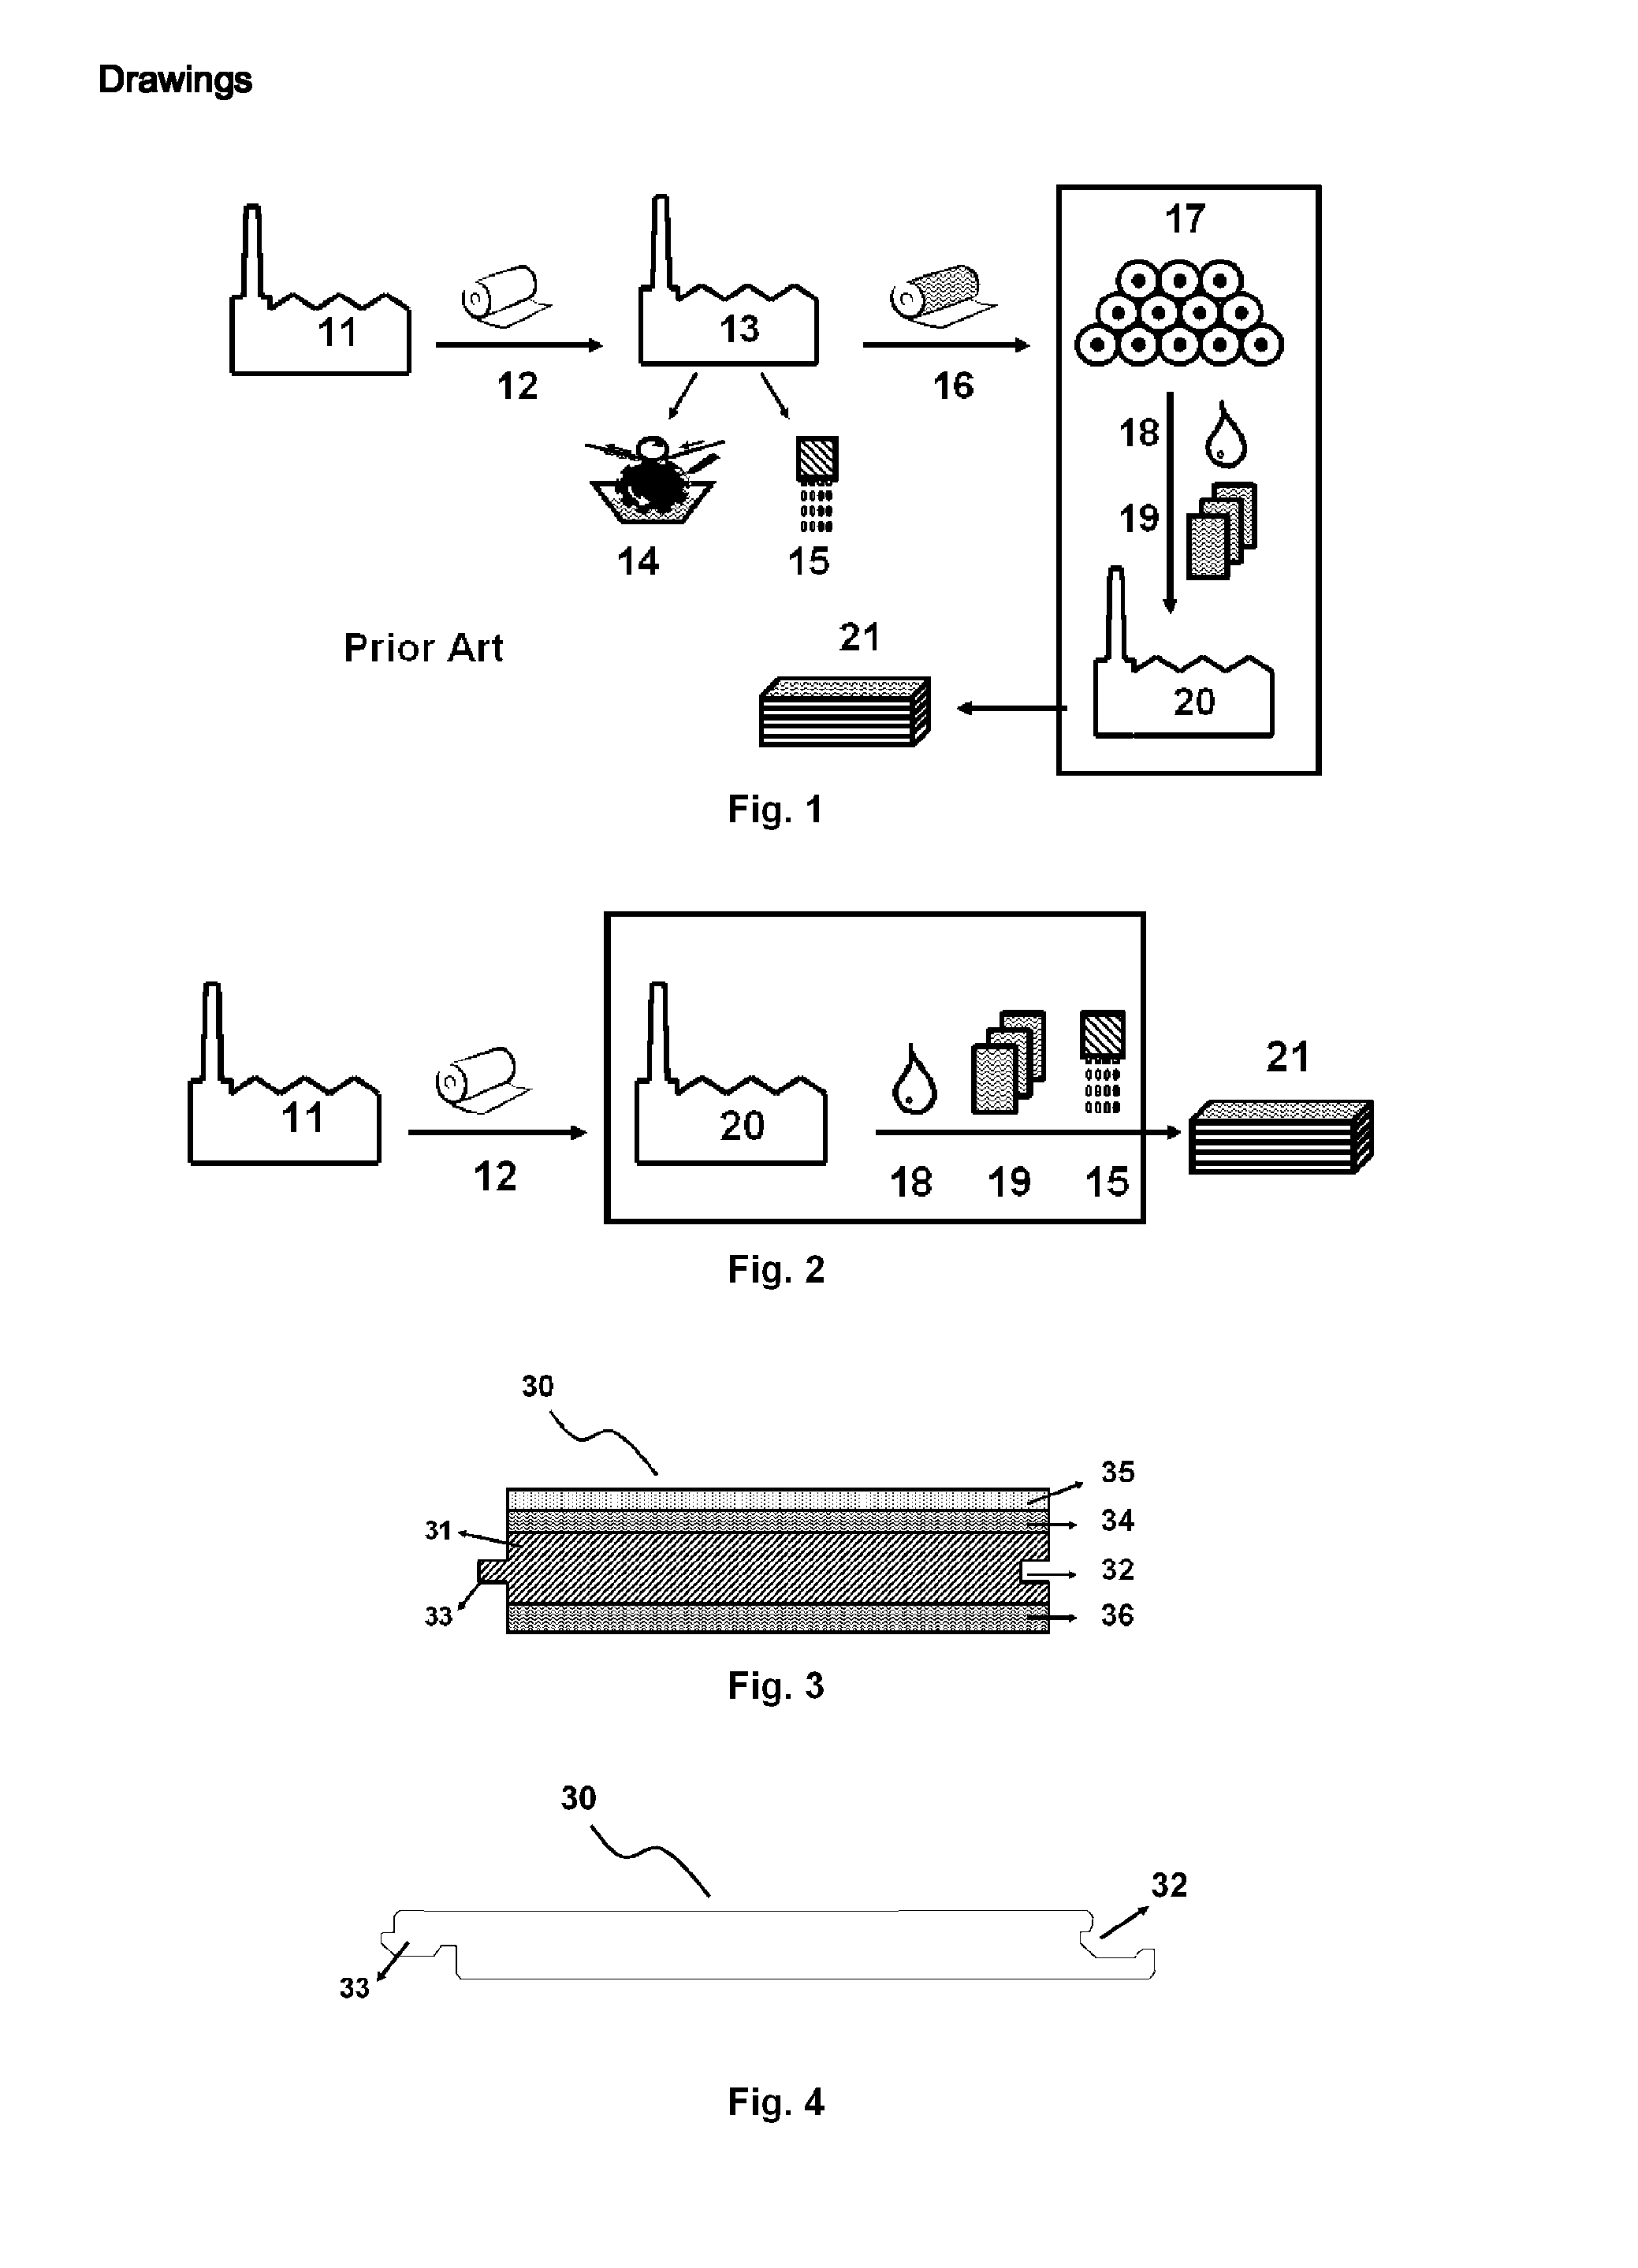 Inkjet printing methods for manufacturing of decorative surfaces